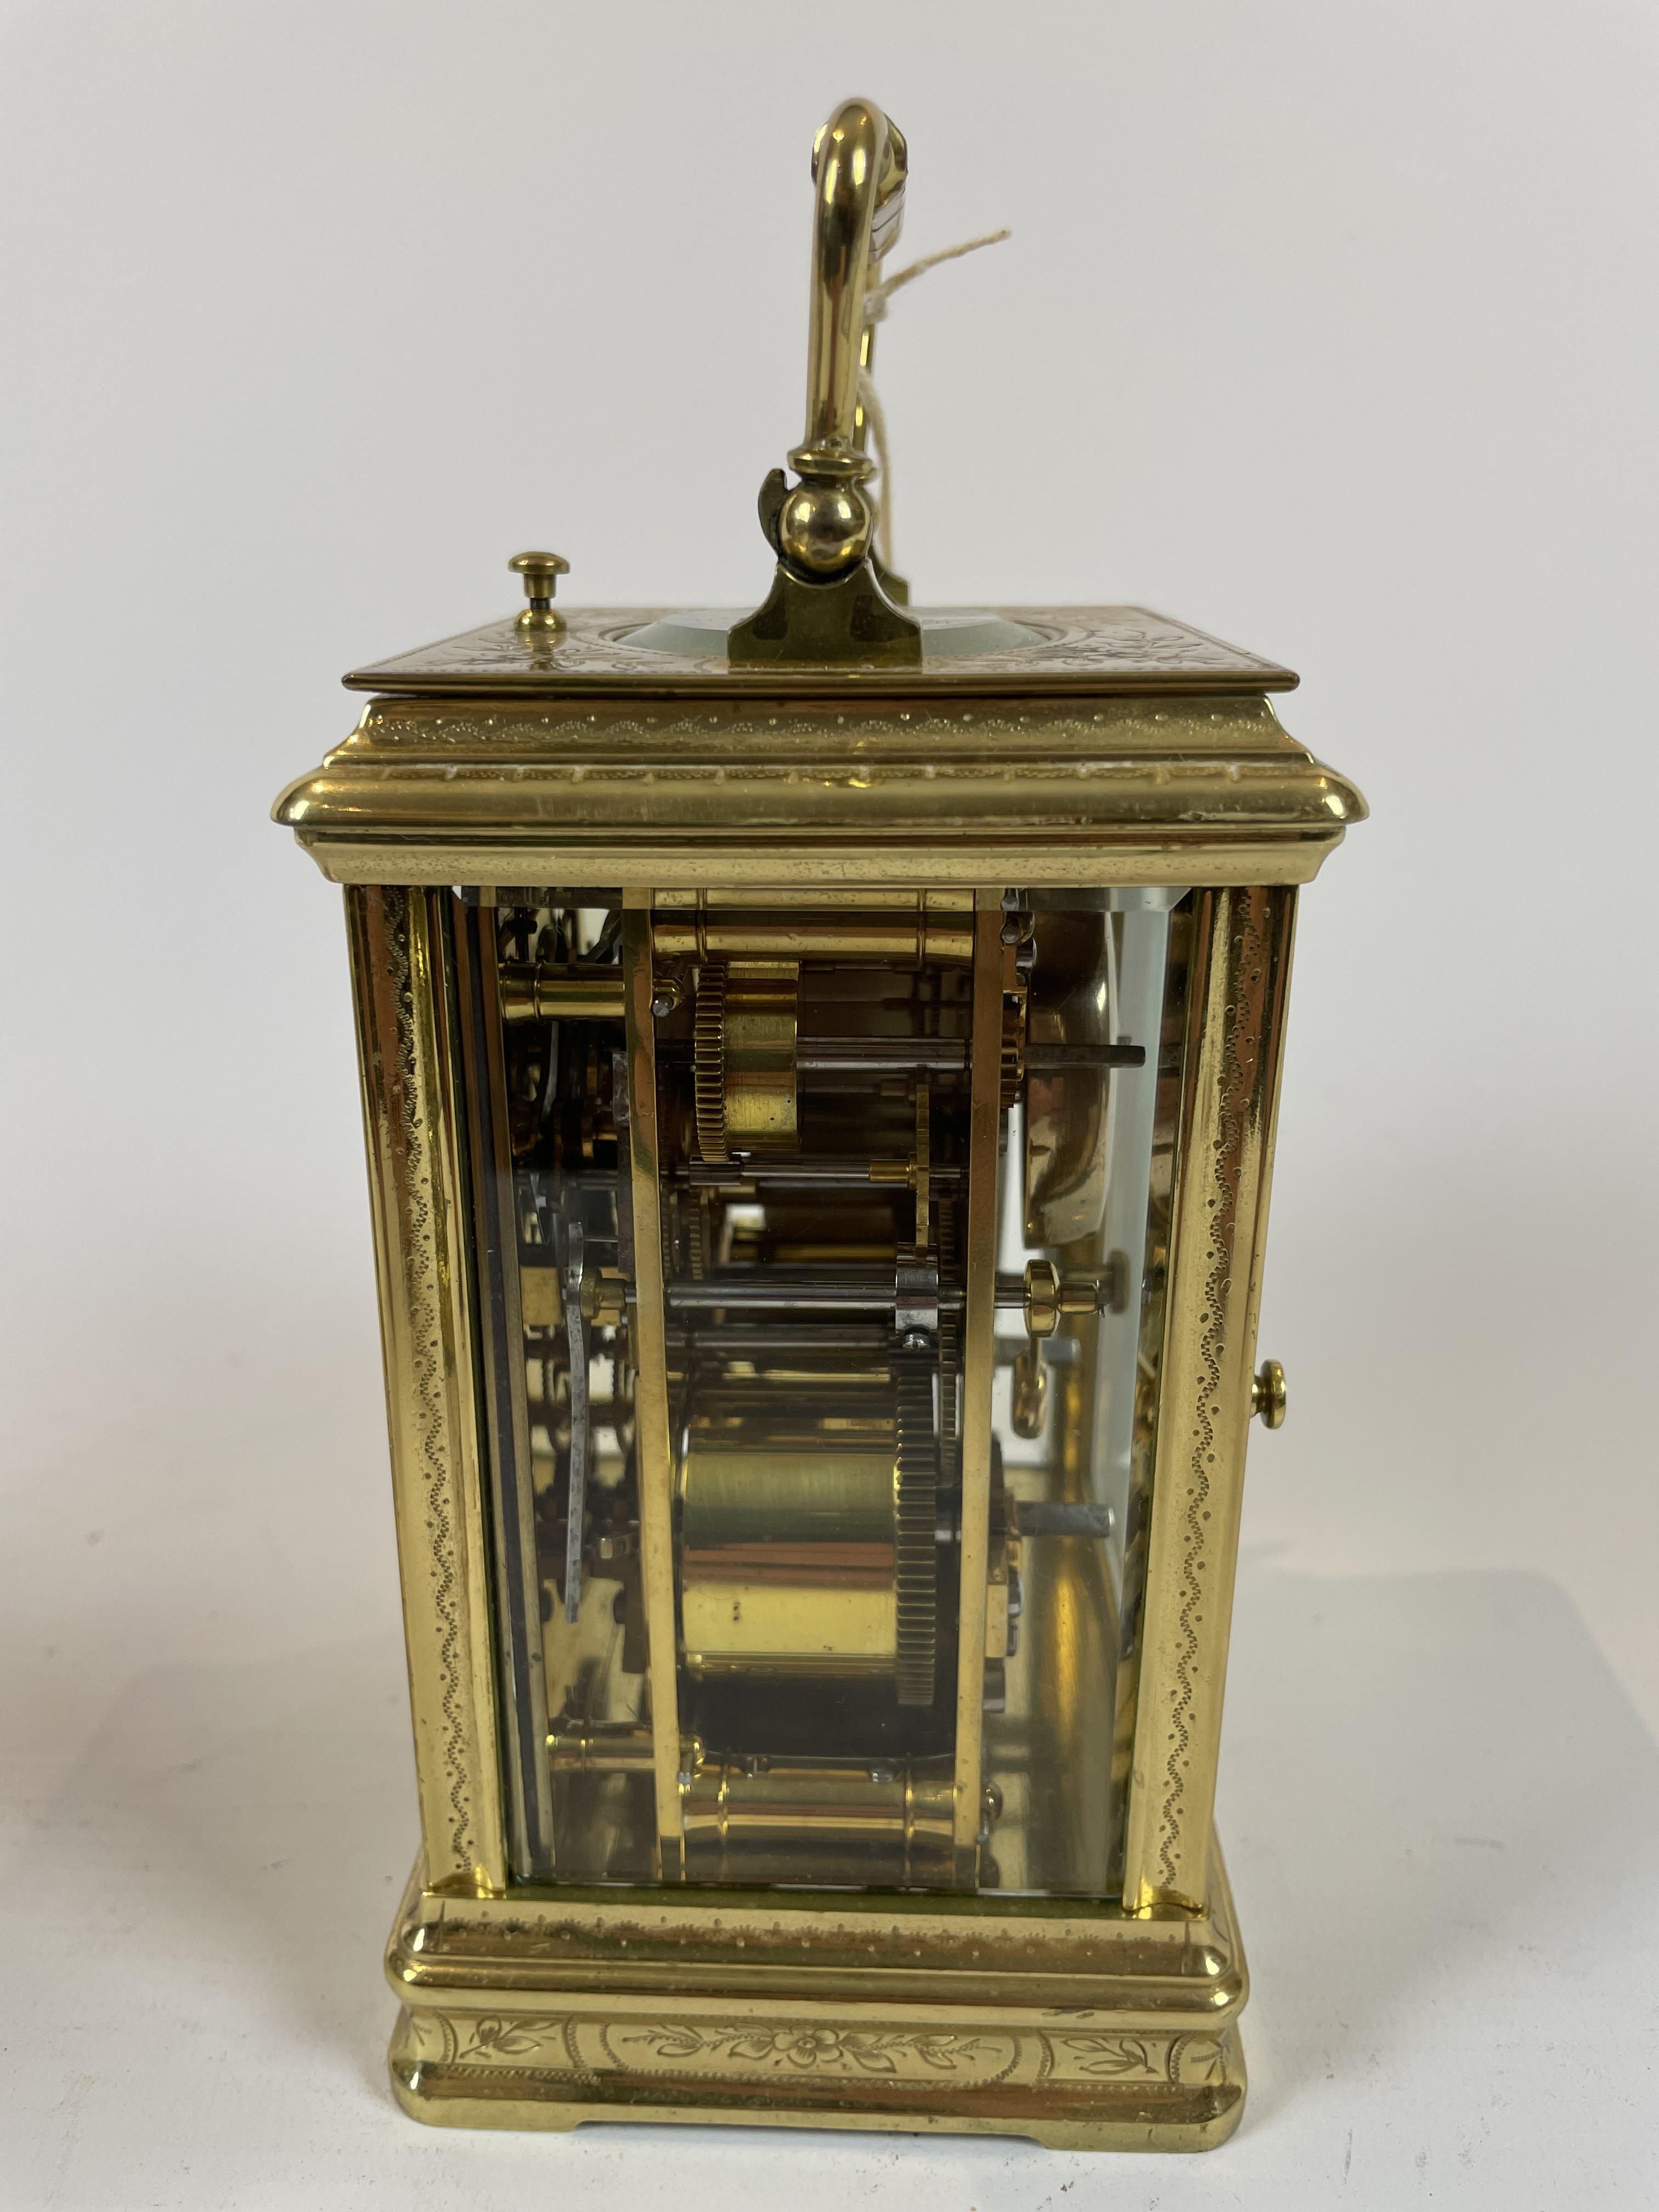 Repeater Carriage Clock - Image 2 of 2